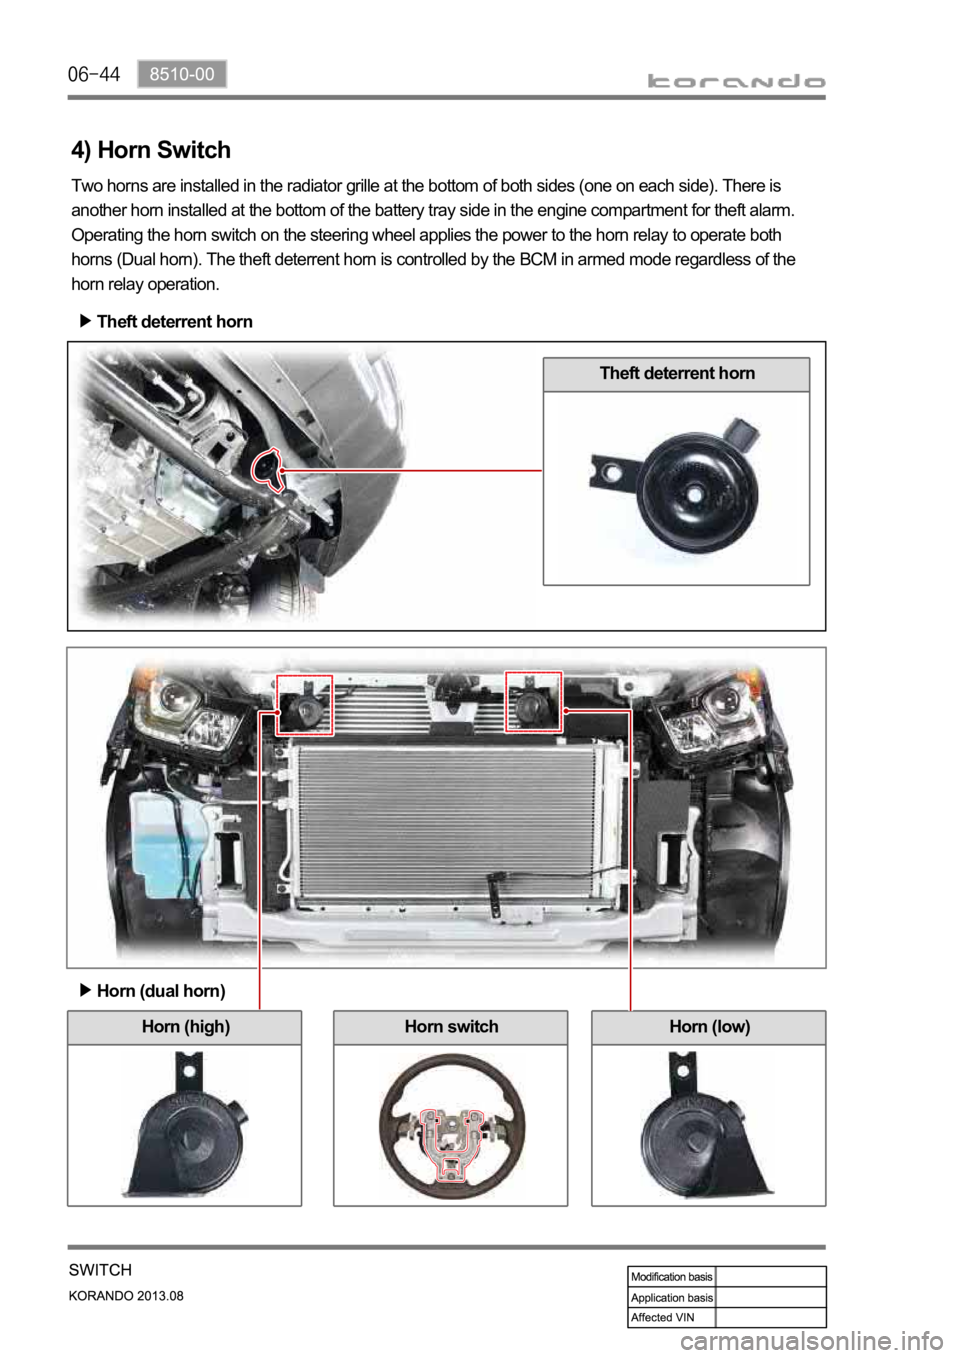 SSANGYONG KORANDO 2013 Owners Guide Horn (high) Horn (low)
Theft deterrent horn
Theft deterrent horn
4) Horn Switch
Two horns are installed in the radiator grille at the bottom of both sides (one on each side). There is 
another horn in